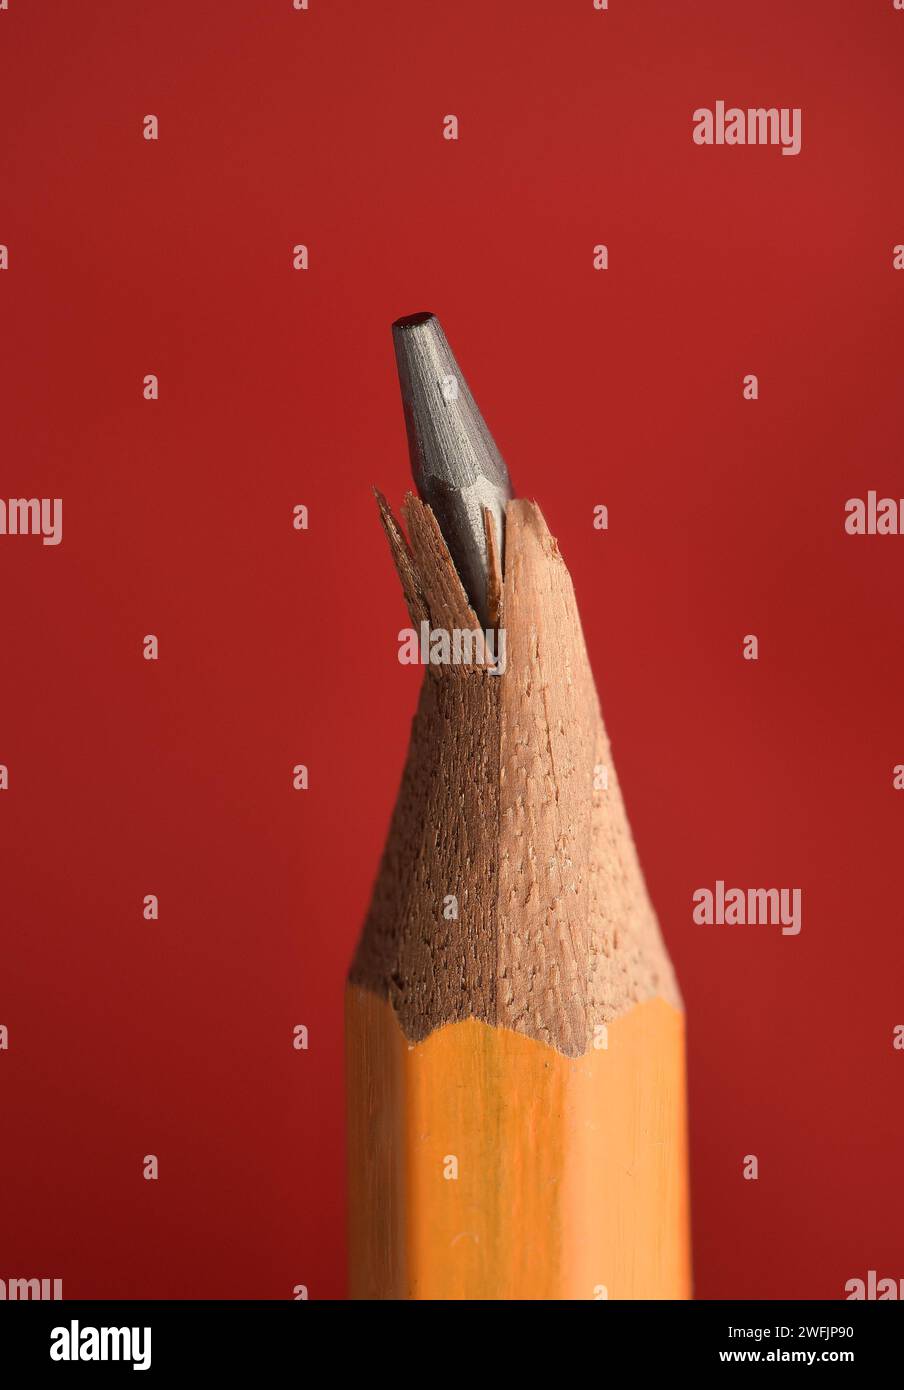 Details of broken wooden pencil tip or graphite. Isolated on red background. Broken object as a visual metaphor for fracture or crack. Close Up. Stock Photo